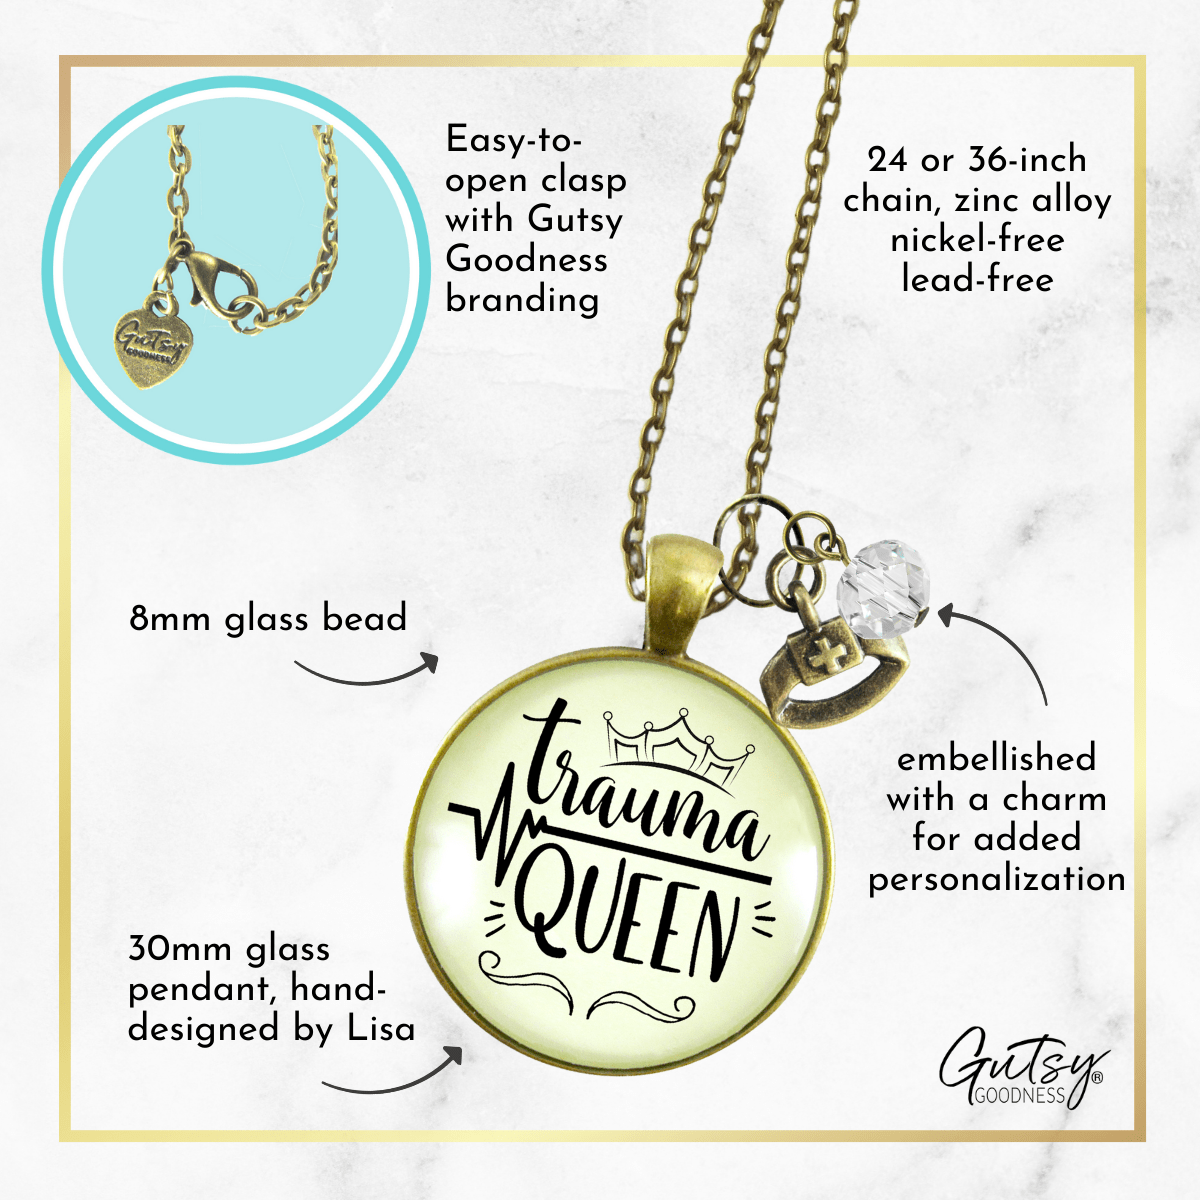 Gutsy Goodness Trauma Queen Necklace Nurse Medical Assistant Funny Quote Jewelry - Gutsy Goodness Handmade Jewelry;Trauma Queen Necklace Nurse Medical Assistant Funny Quote Jewelry - Gutsy Goodness Handmade Jewelry Gifts